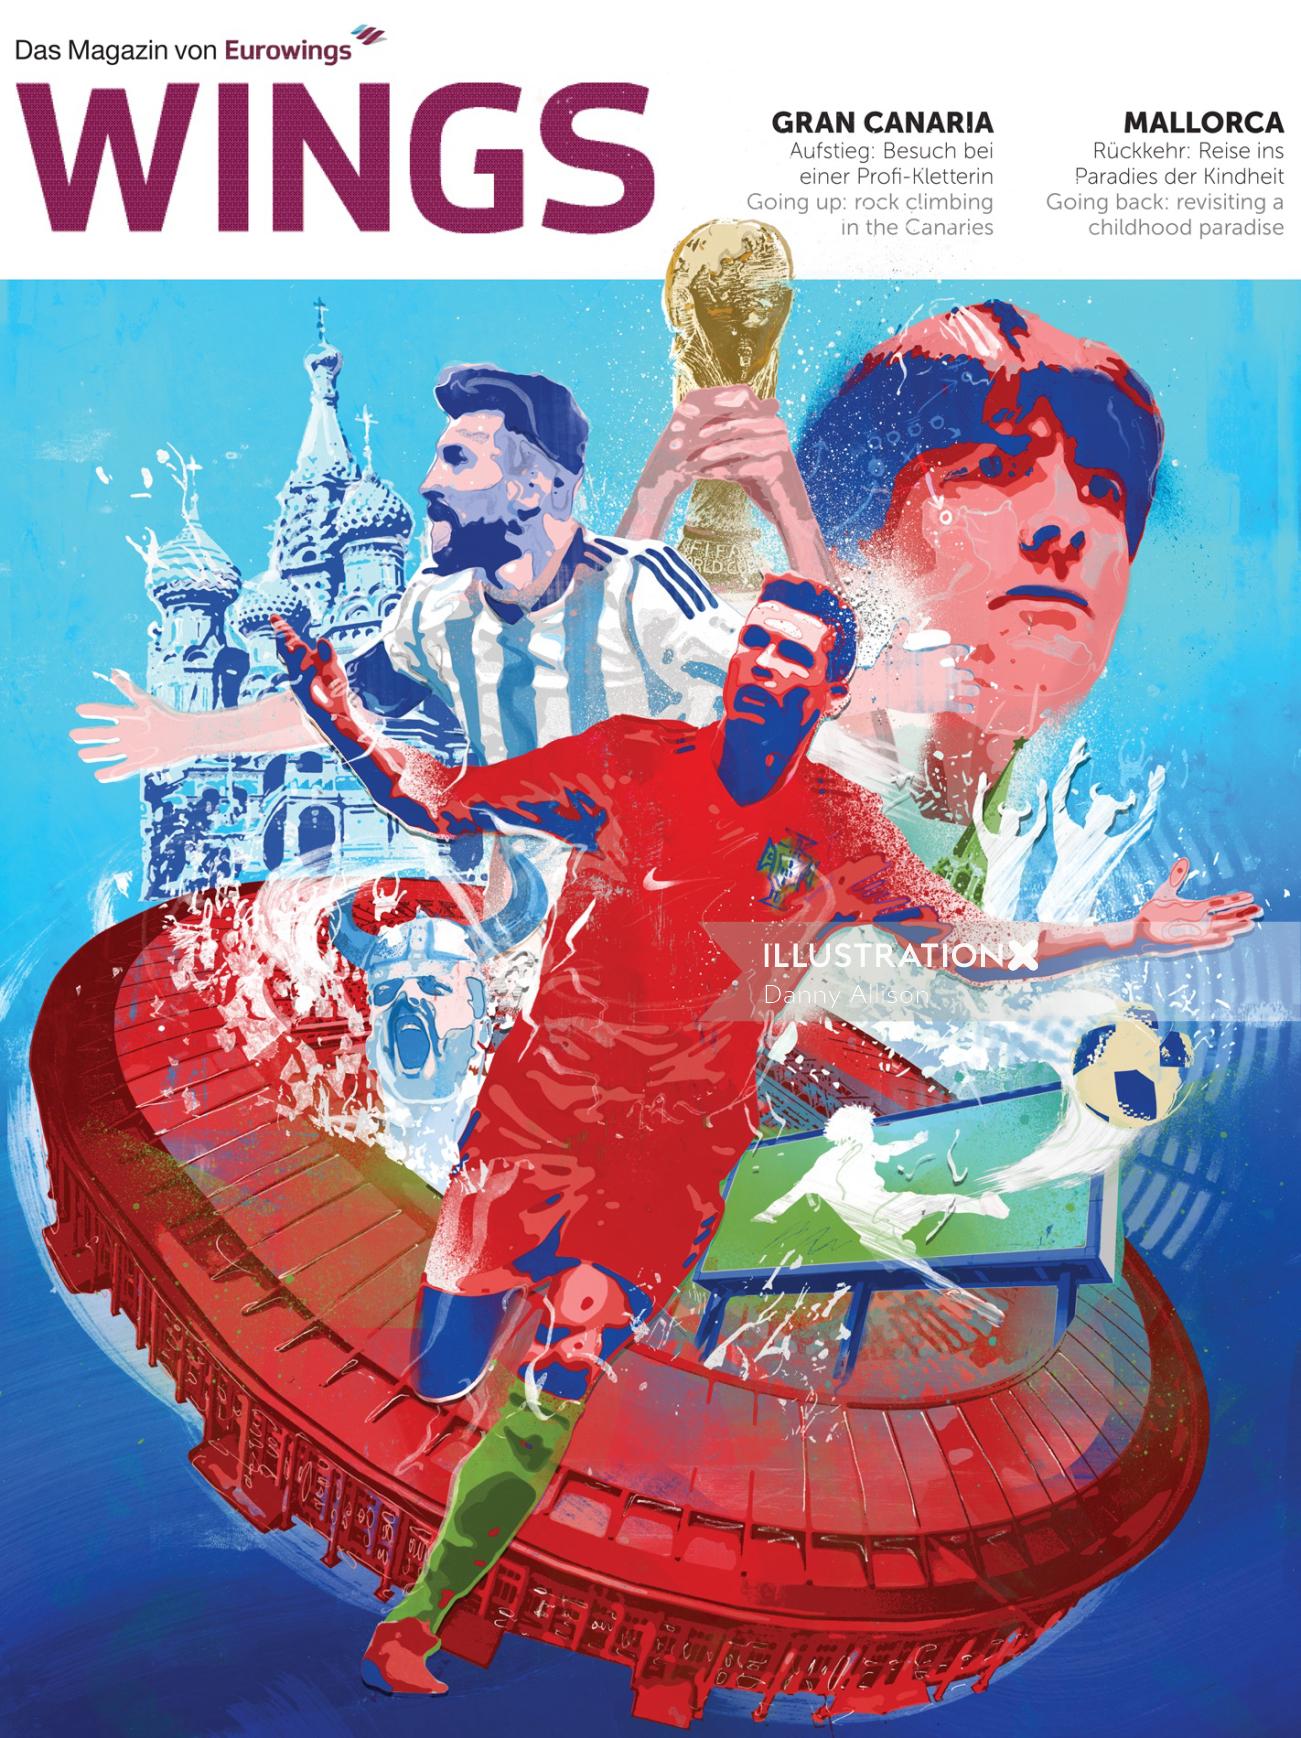 Graphic design for fife world cup